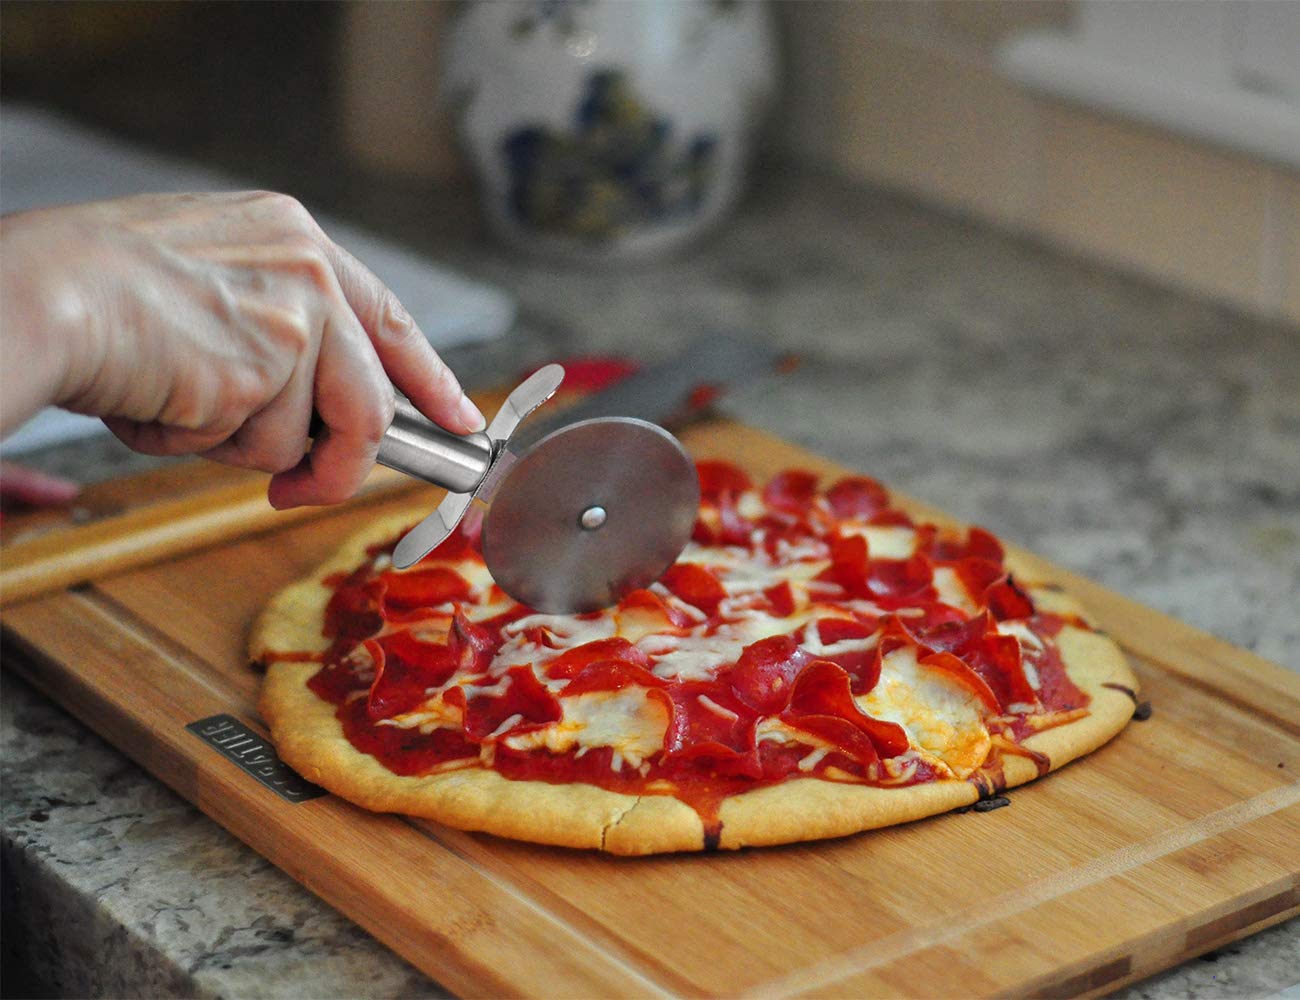 Onlyfire Round Pizza Stone Set for Oven and Grill, Pizza Grilling Tool Kit Including Baking Stone, Pizza Peel, Pizza Shovel and Cutter, Ideal for Baking Crisp Crust Pizza, Bread and More